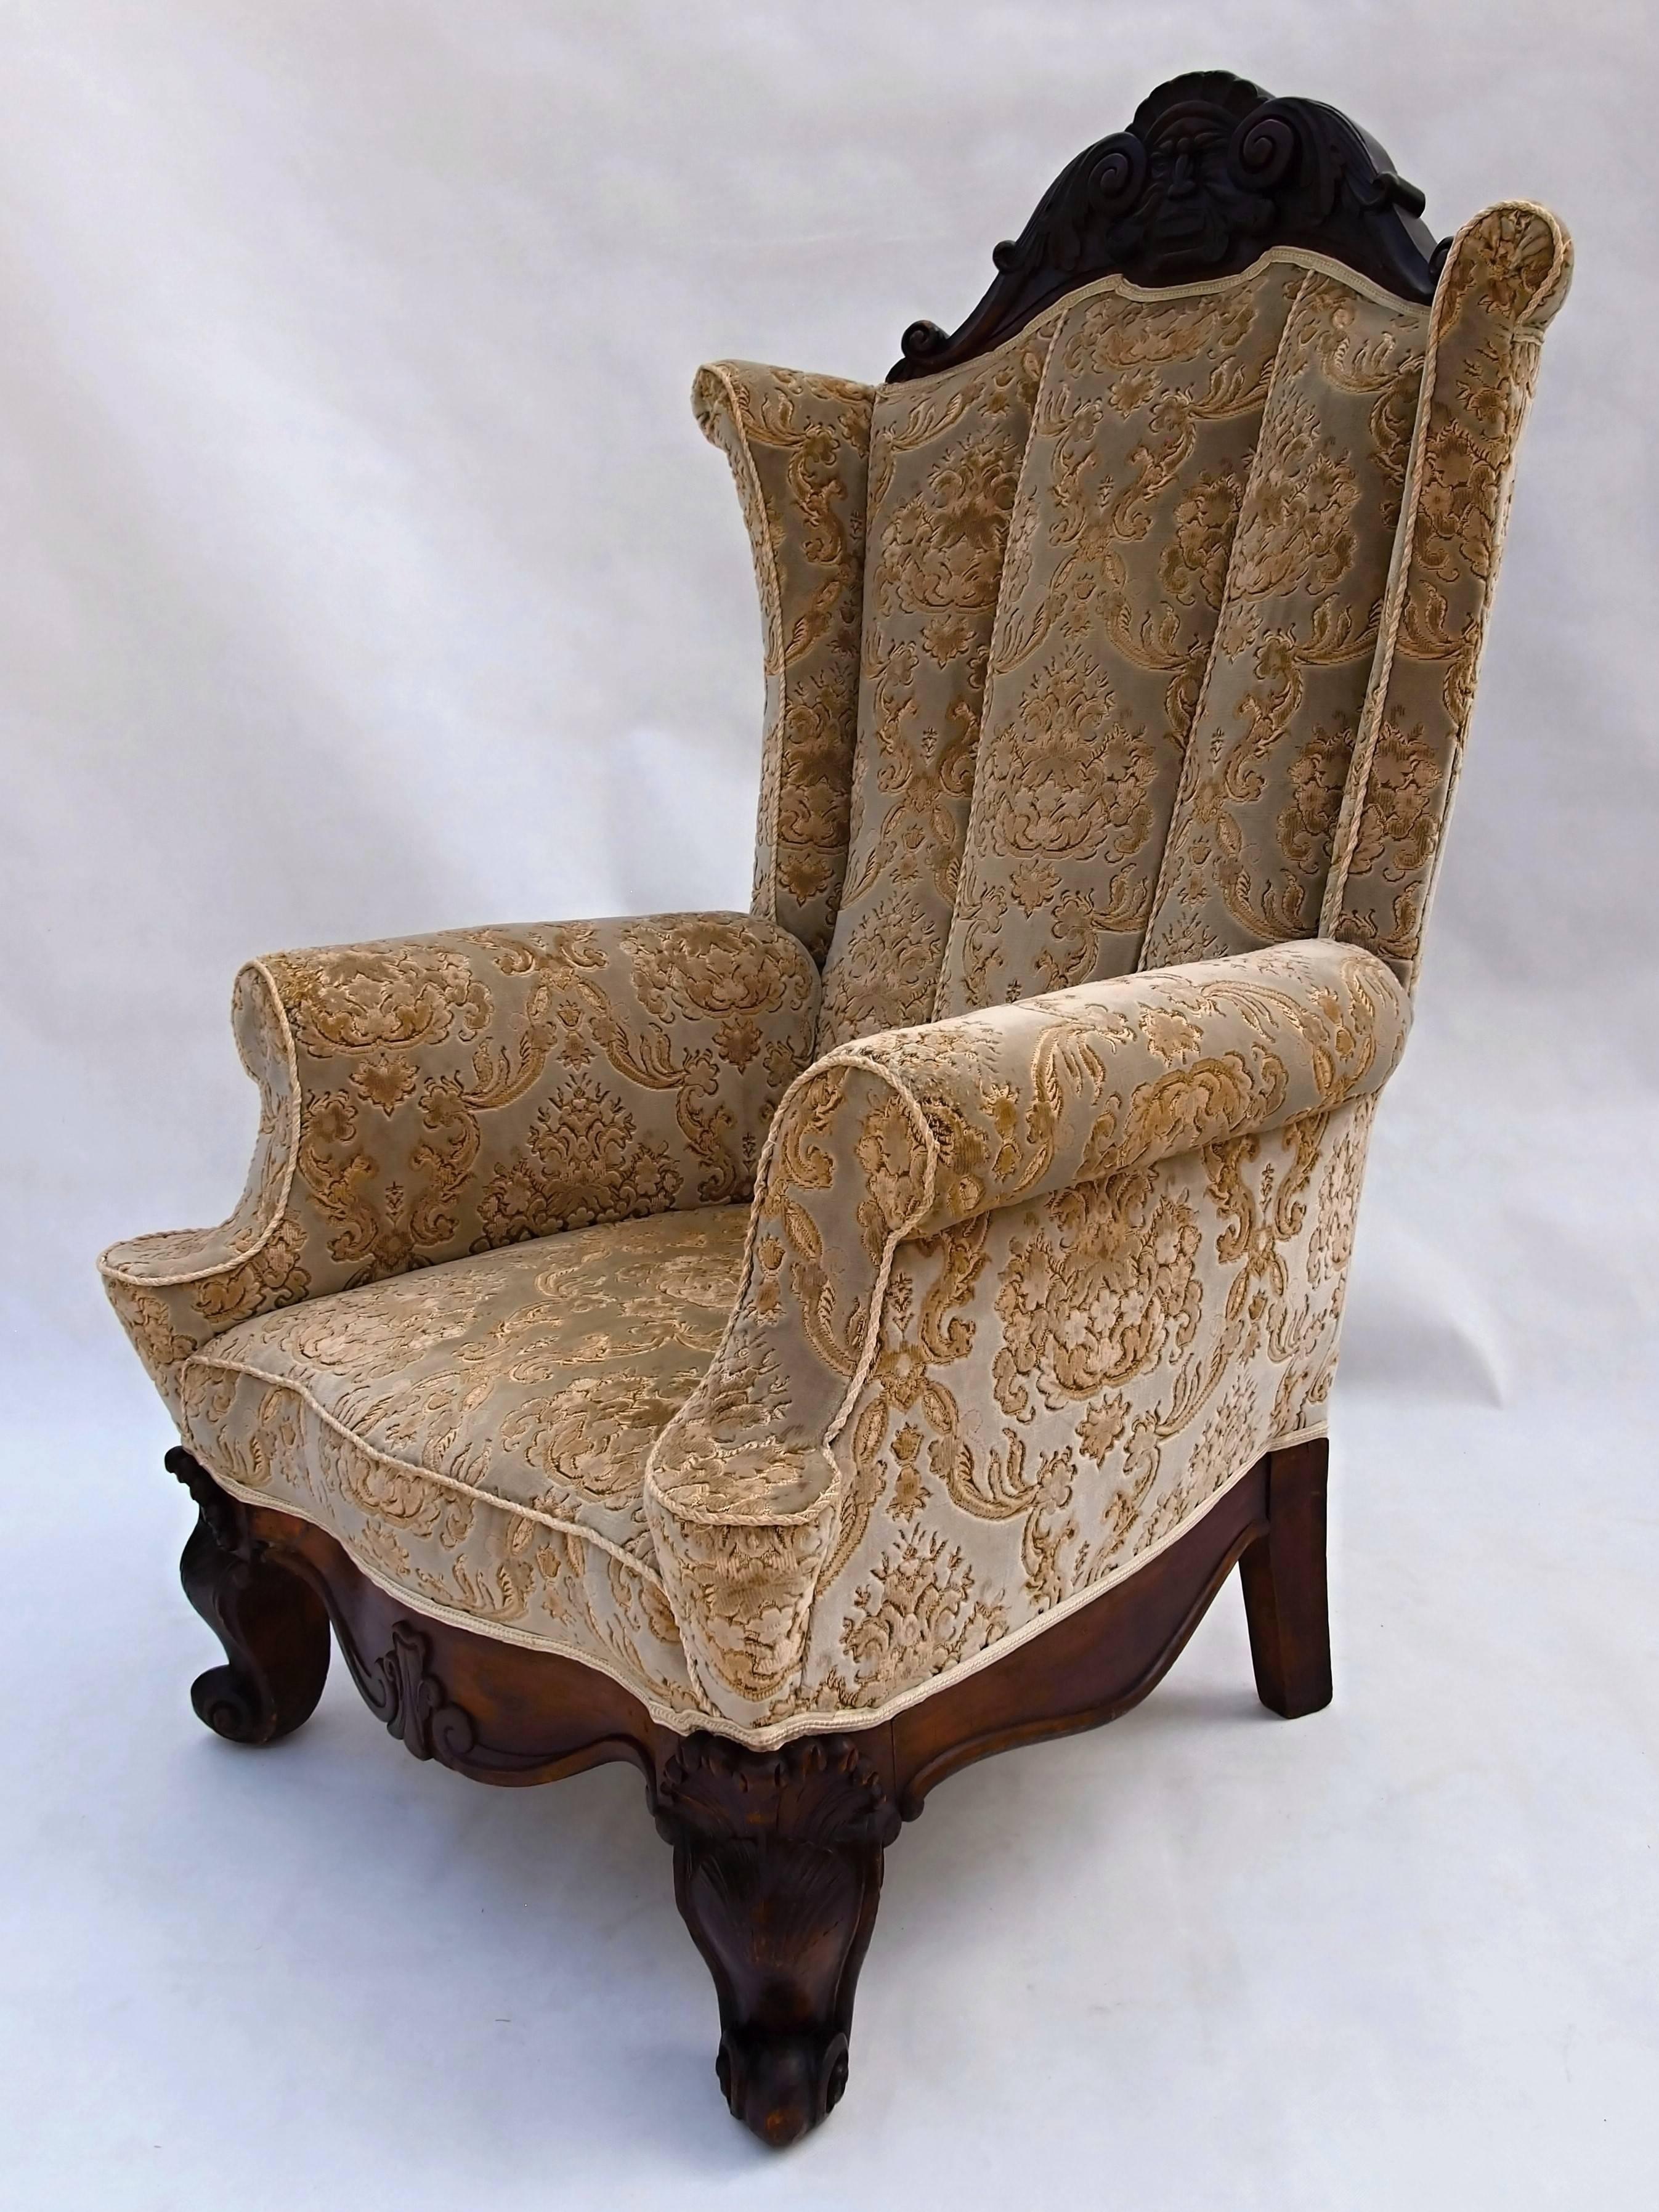 Rare gorgeous massive wing armchair with carved walnut legs and top,
the first half of 19th century.